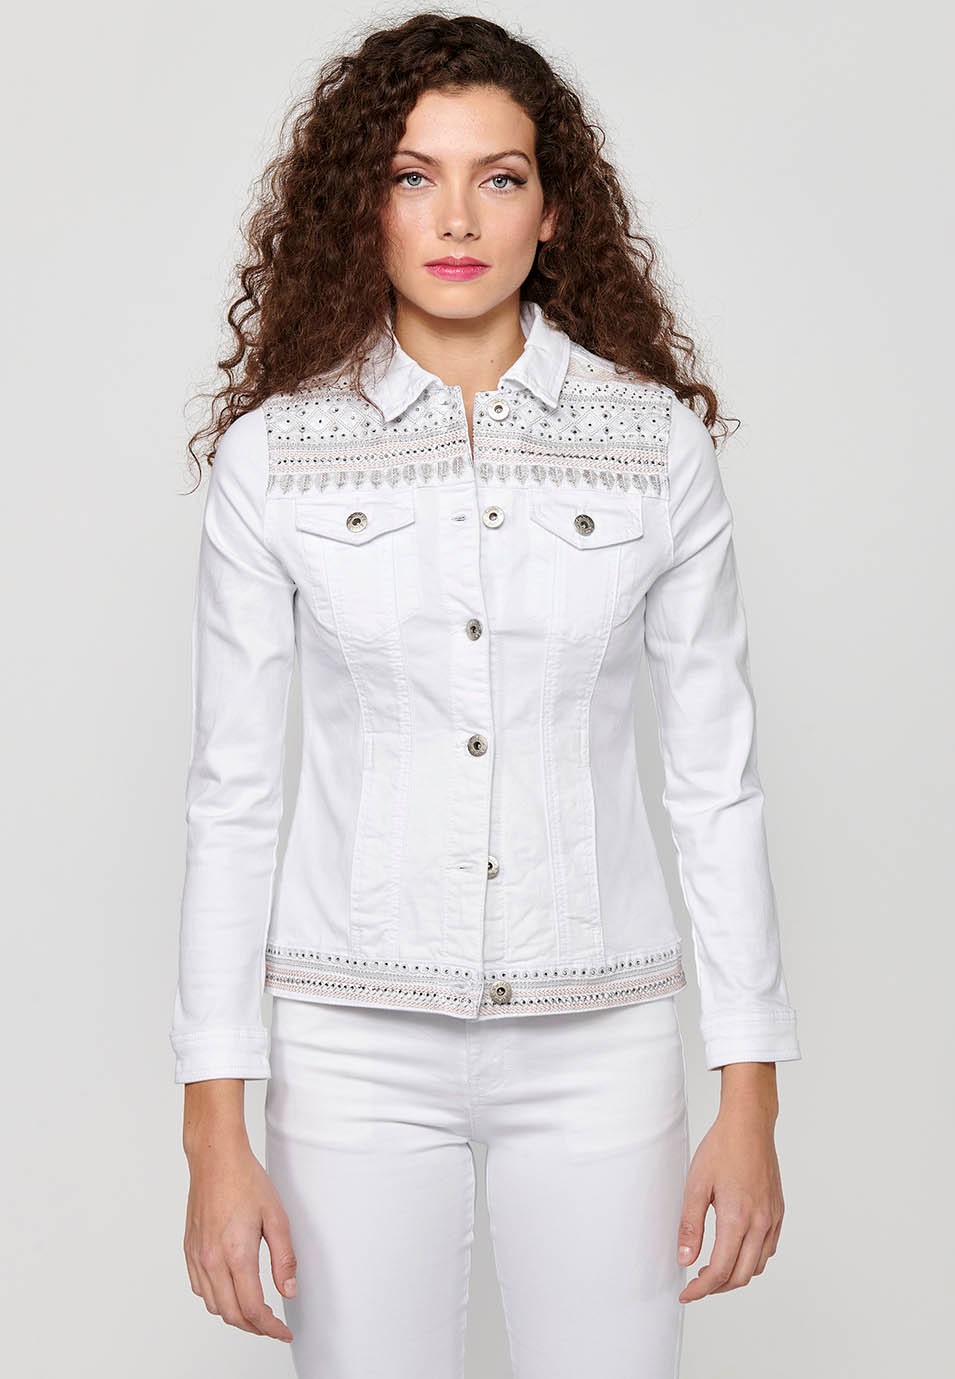 Denim Jacket with Button Front Closure and Shirt Collar with Floral Embroidery on the Shoulders and with White Pockets for Women 5